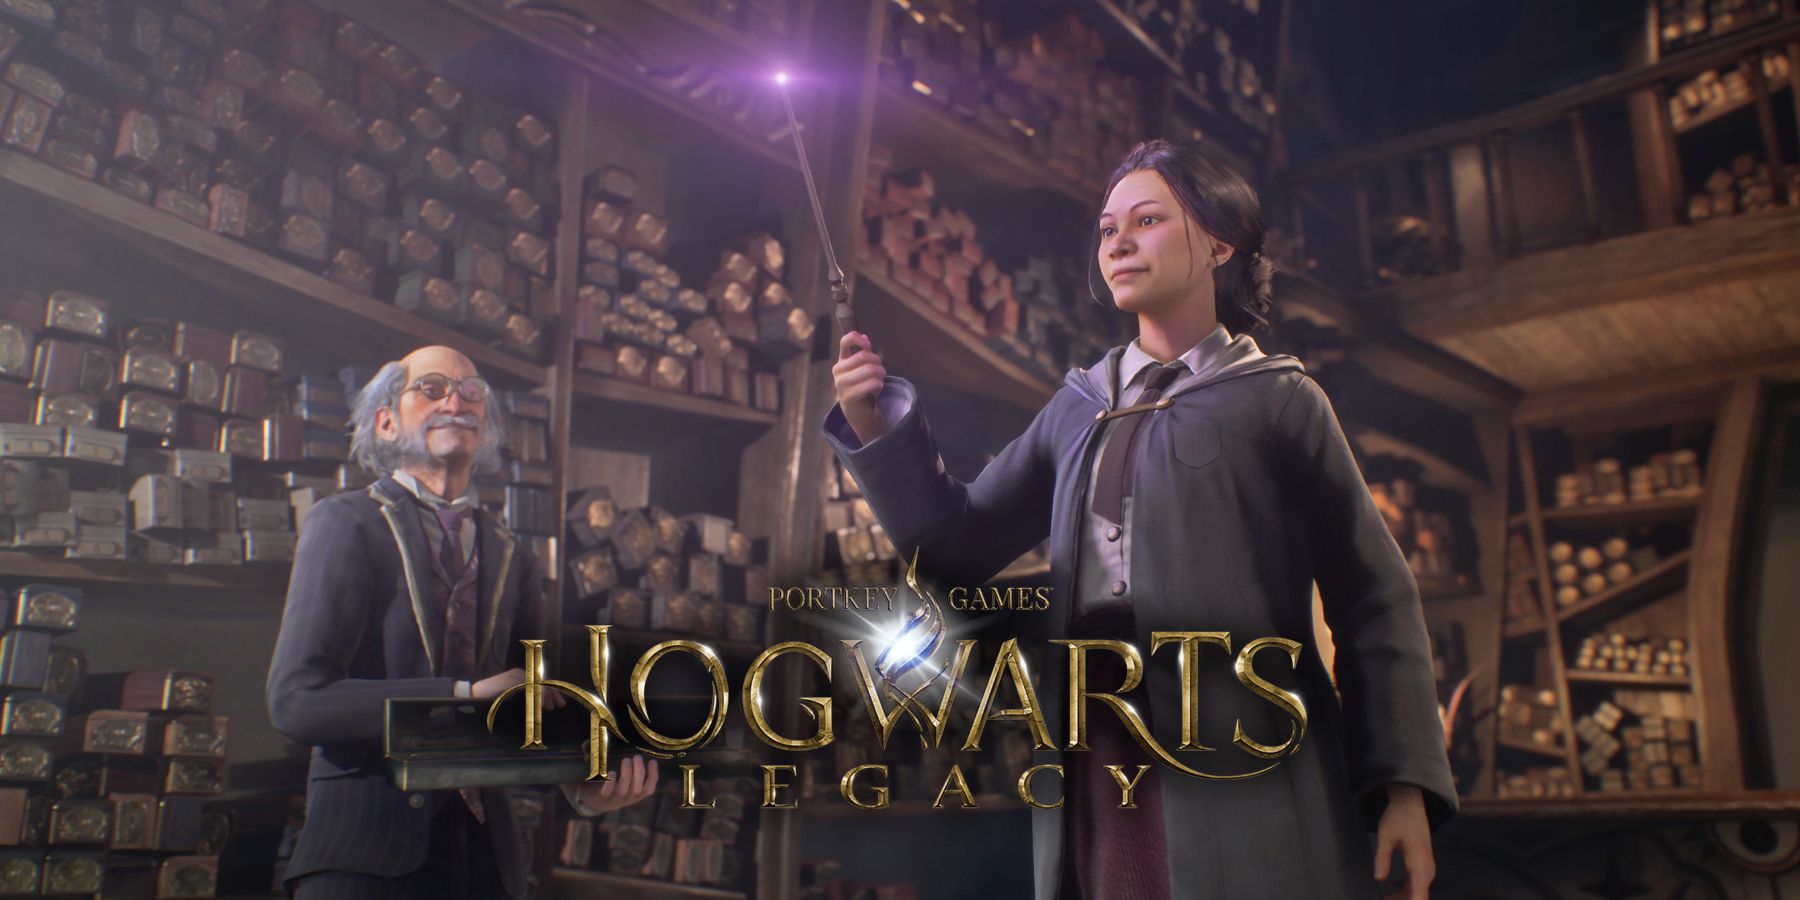 A young witch receives her wand from the wand shop in Hogwarts Legacy.